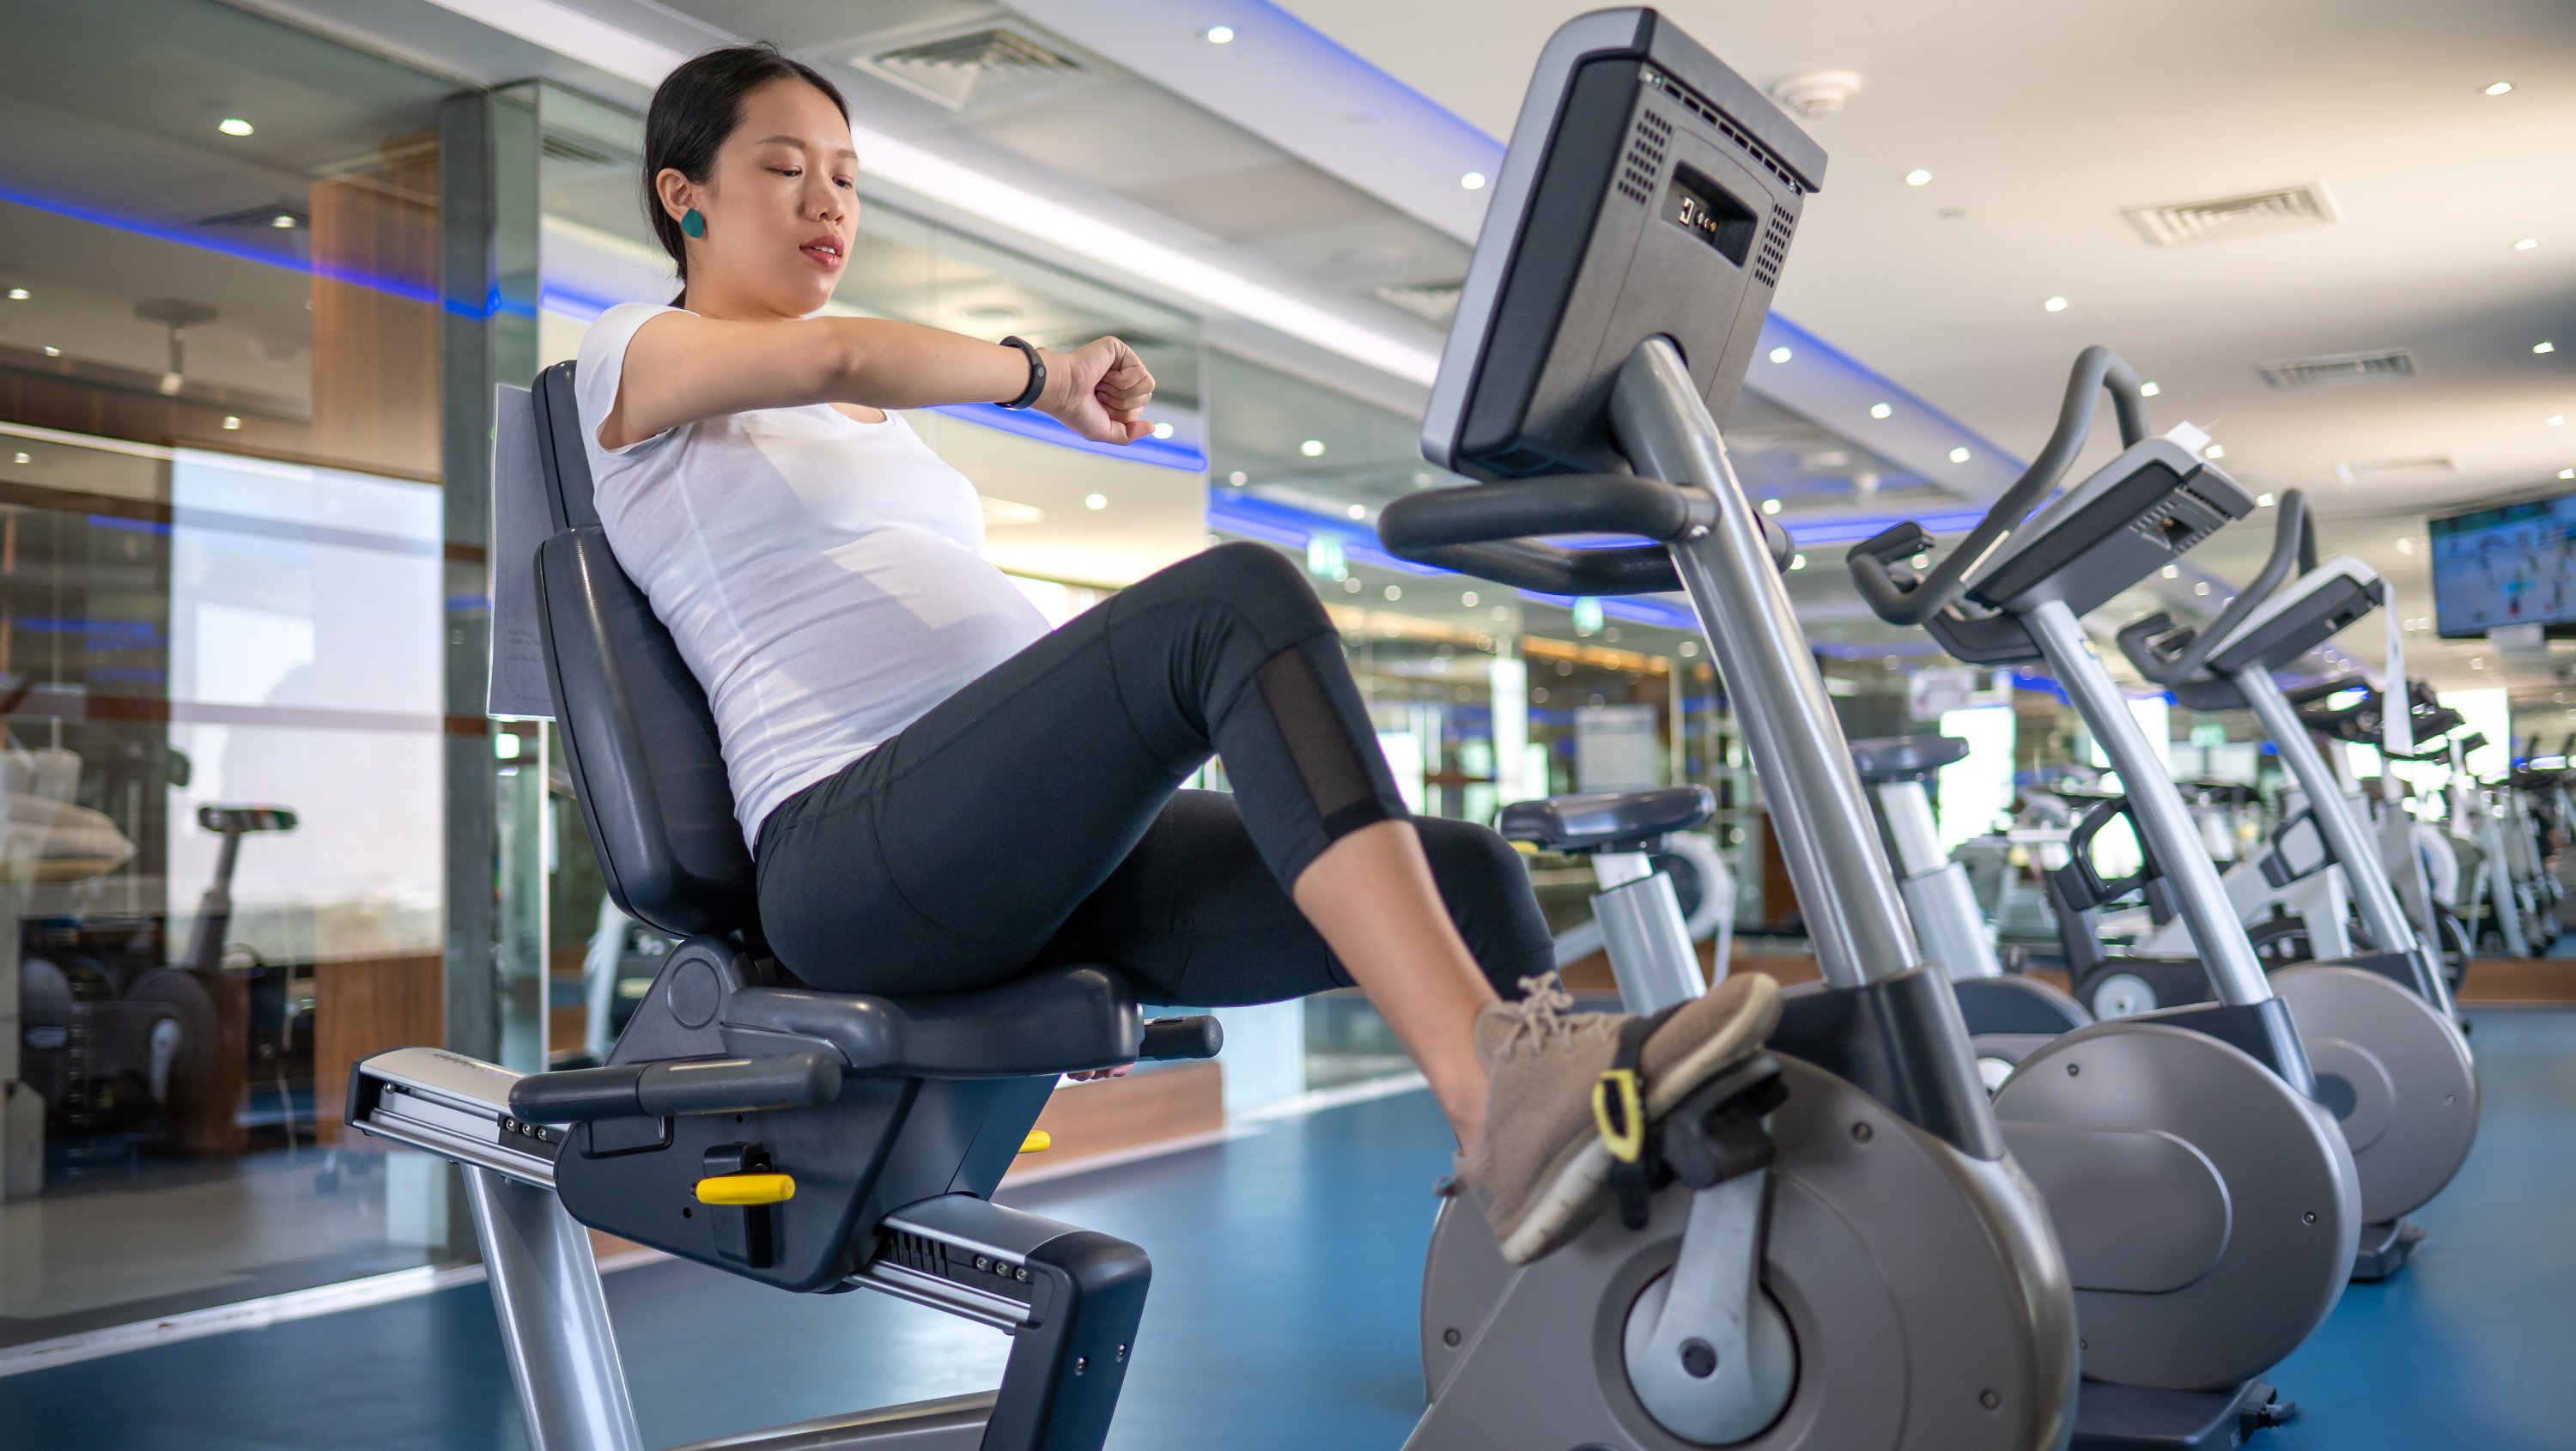 Pregnant person using a stationary bike for exercise